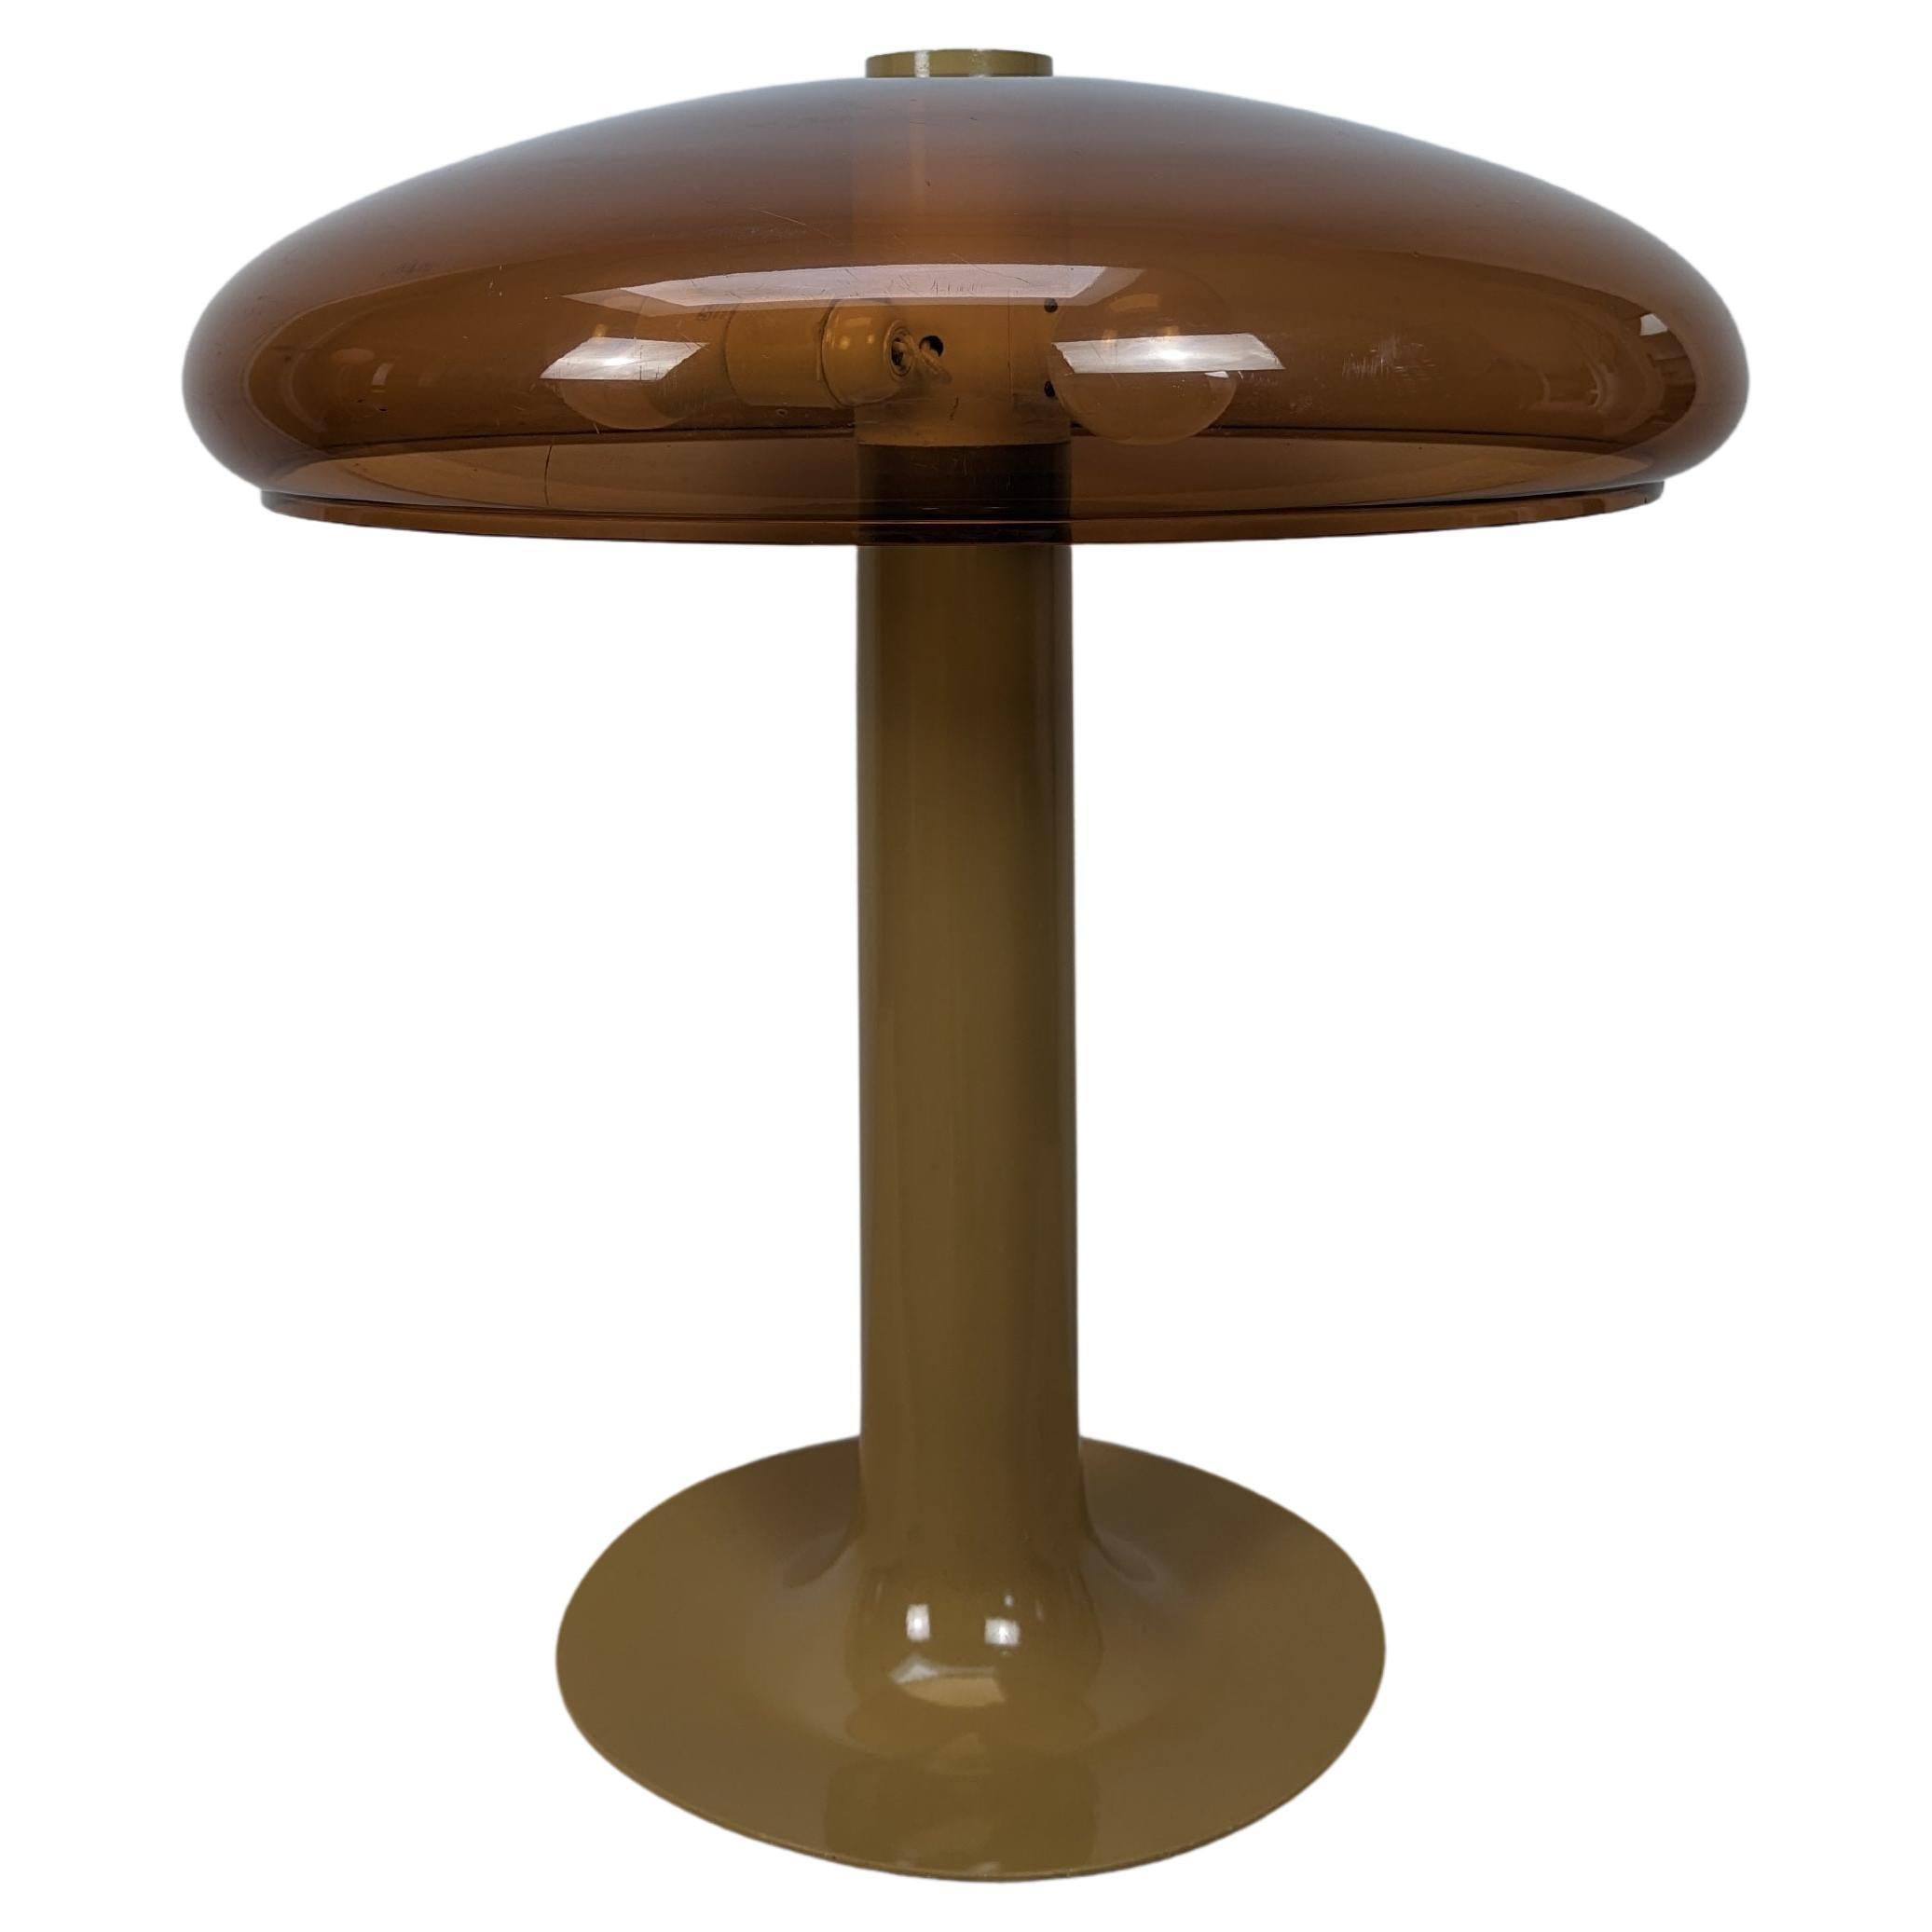 Spectacular space age mid-century table lamp For Sale